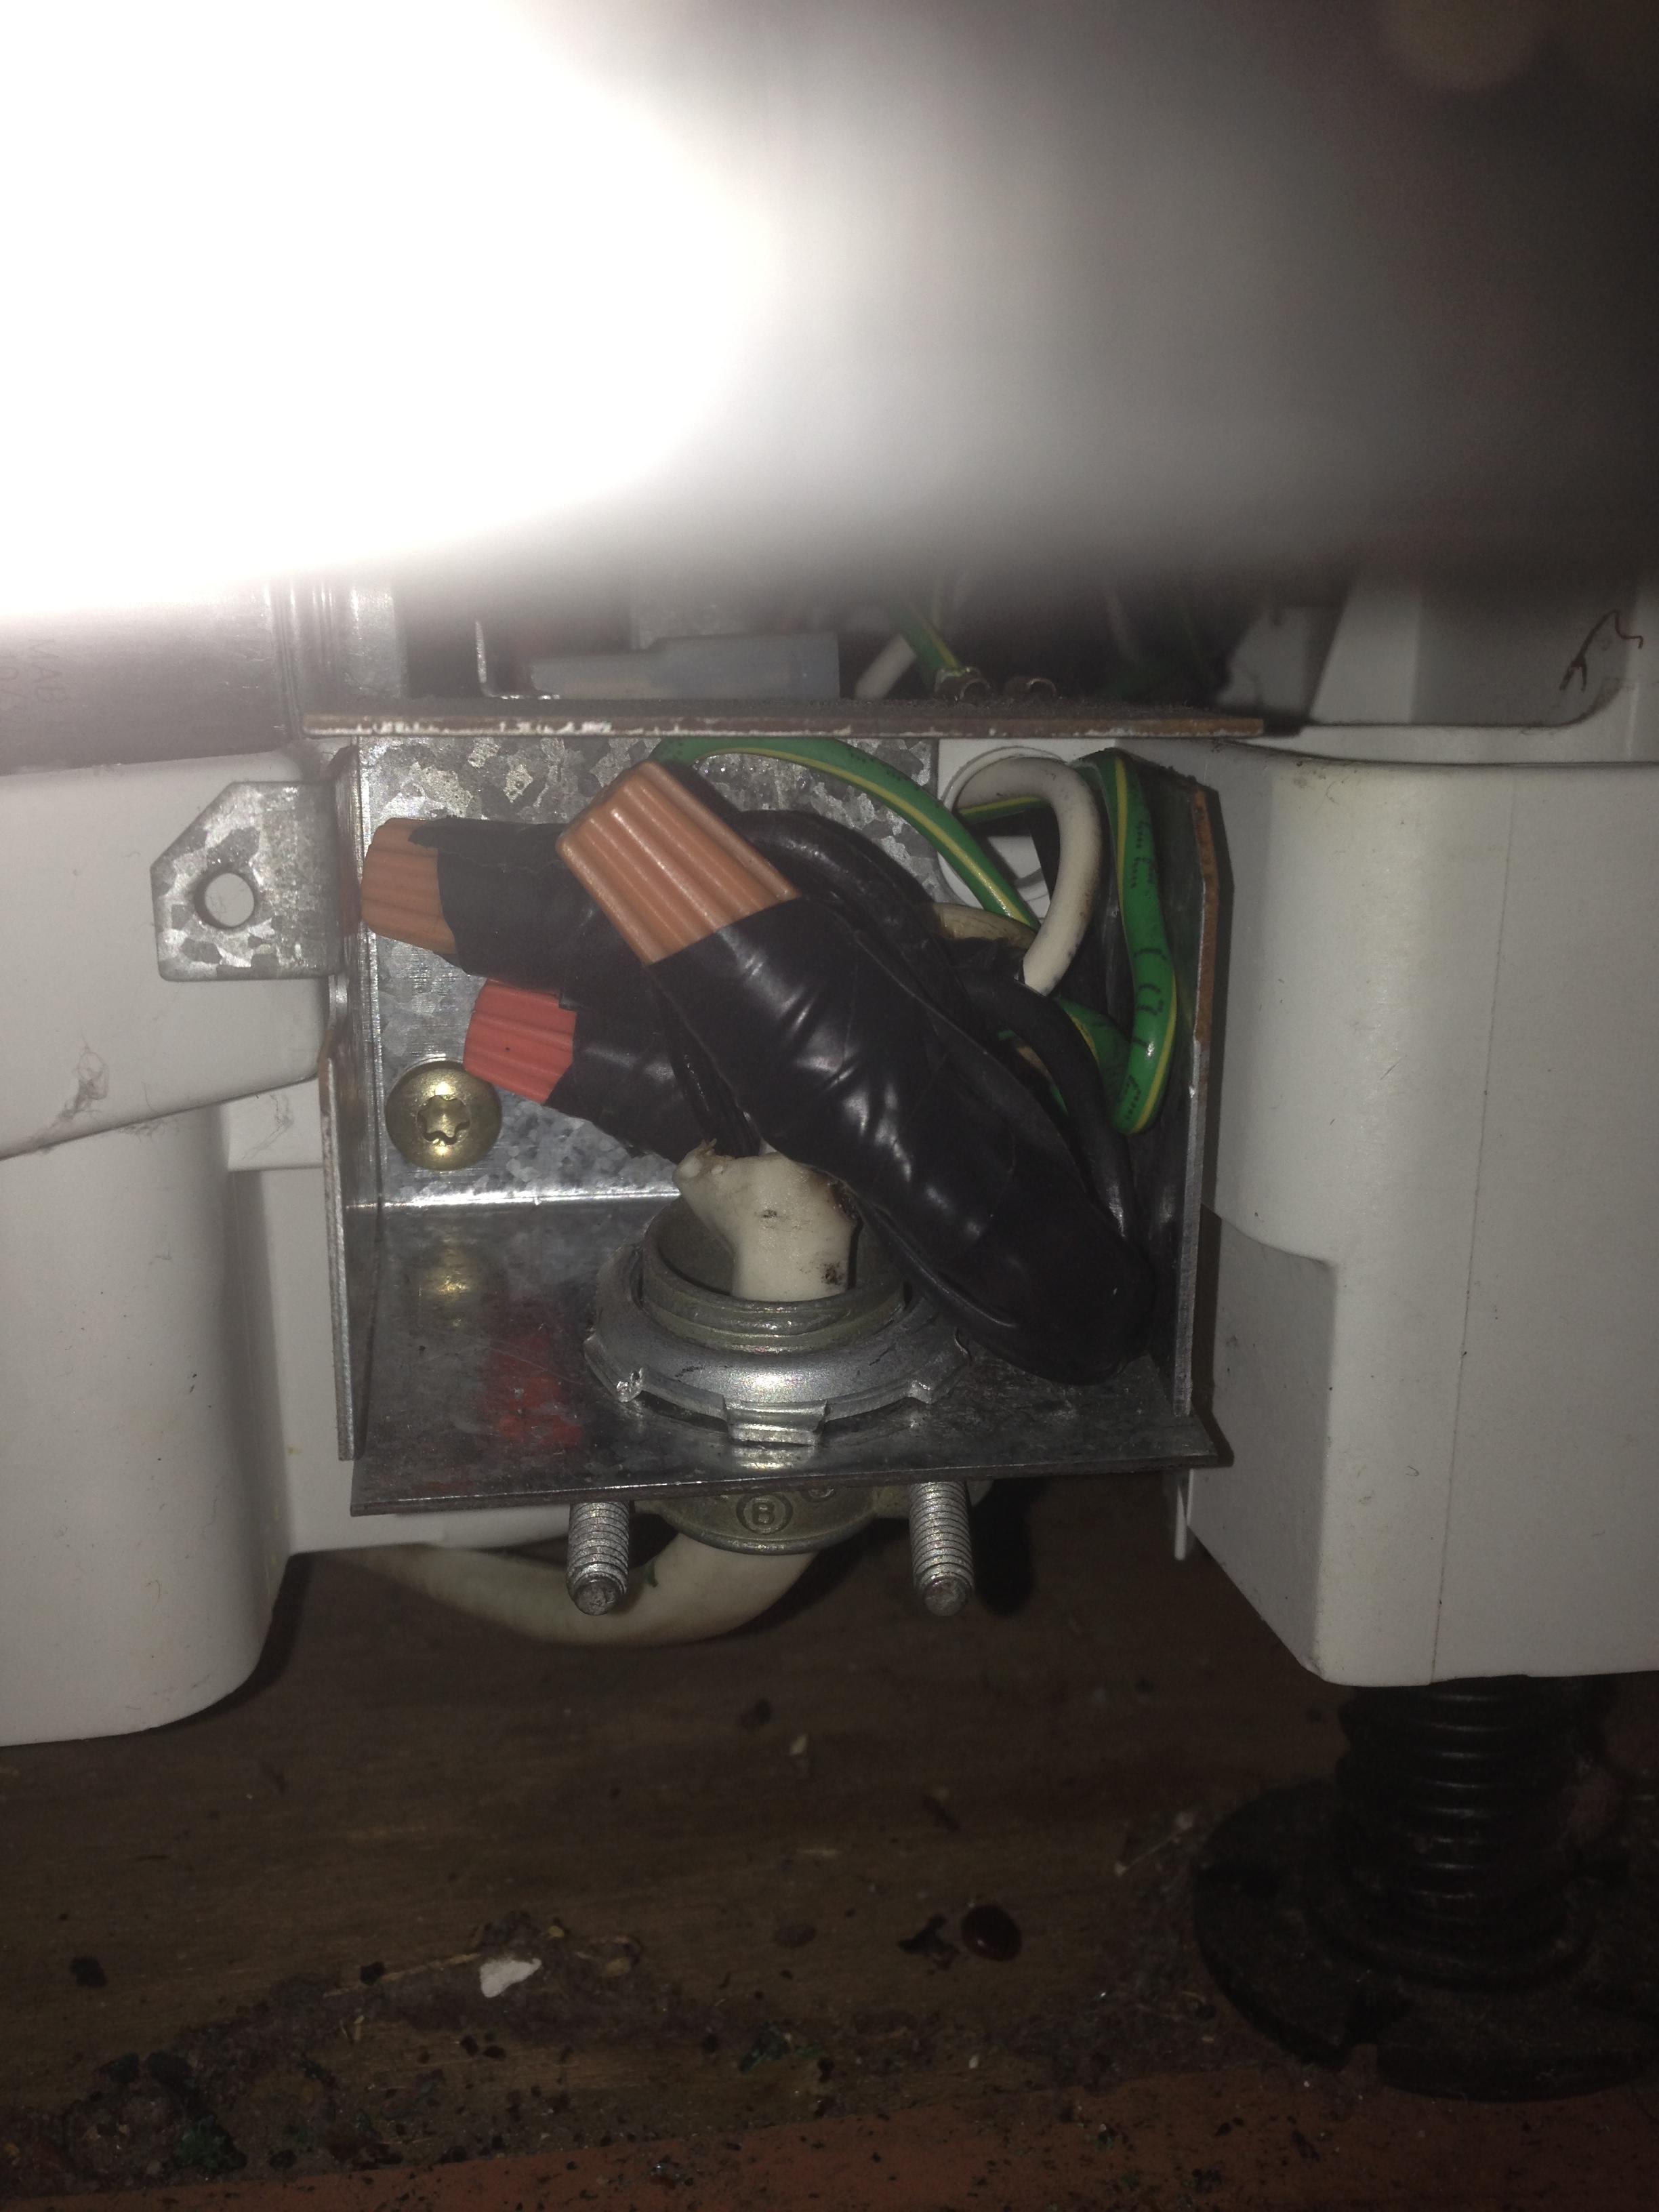 This is how a properly connected and wire nutted dishwasher electrical junction box connection should  look like. After removing the cover plate